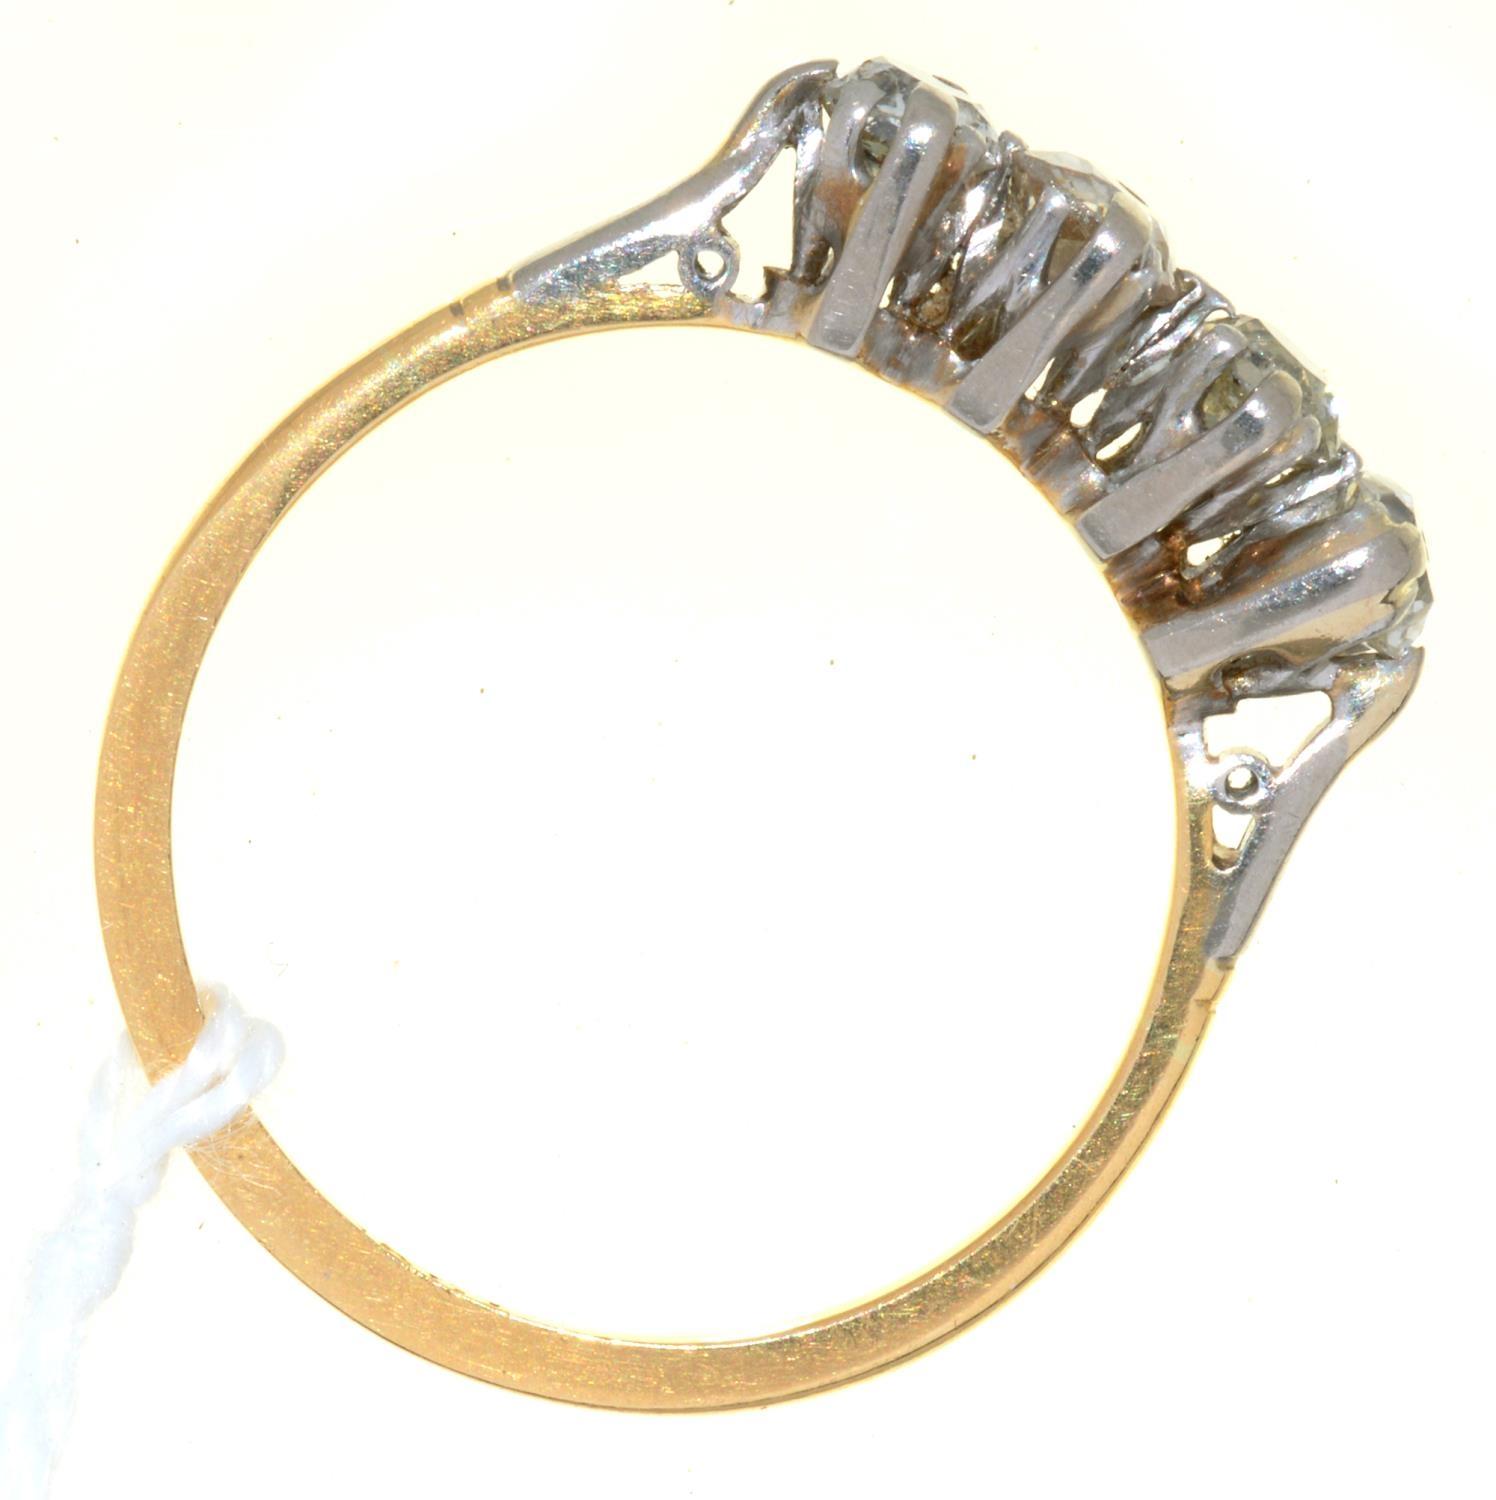 A DIAMOND FOUR STONE RING WITH CUSHION SHAPED OLD CUT DIAMONDS WEIGHING APPROXIMATELY 0.20-0.25CT, - Image 2 of 2